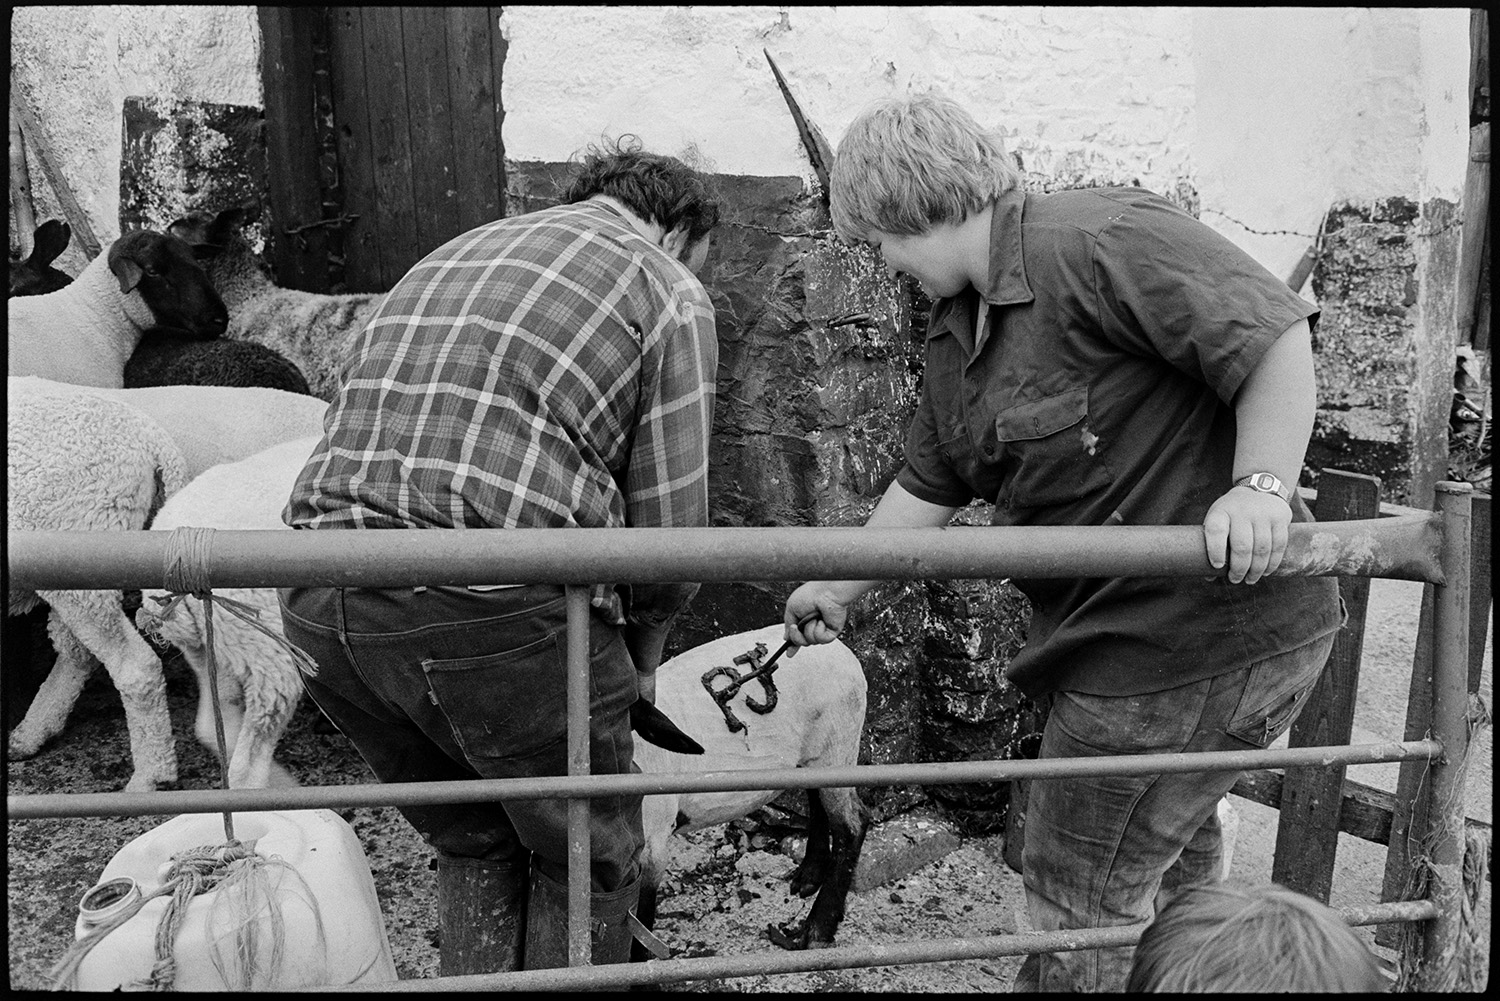 Farmers marking shorn sheep in farmyard.
[Peter Jones marking shorn sheep in a small yard at Upcott Farm, Dolton. A woman, probably his wife, is marking a sheep with the marking iron. They are stood behind a metal gate.]